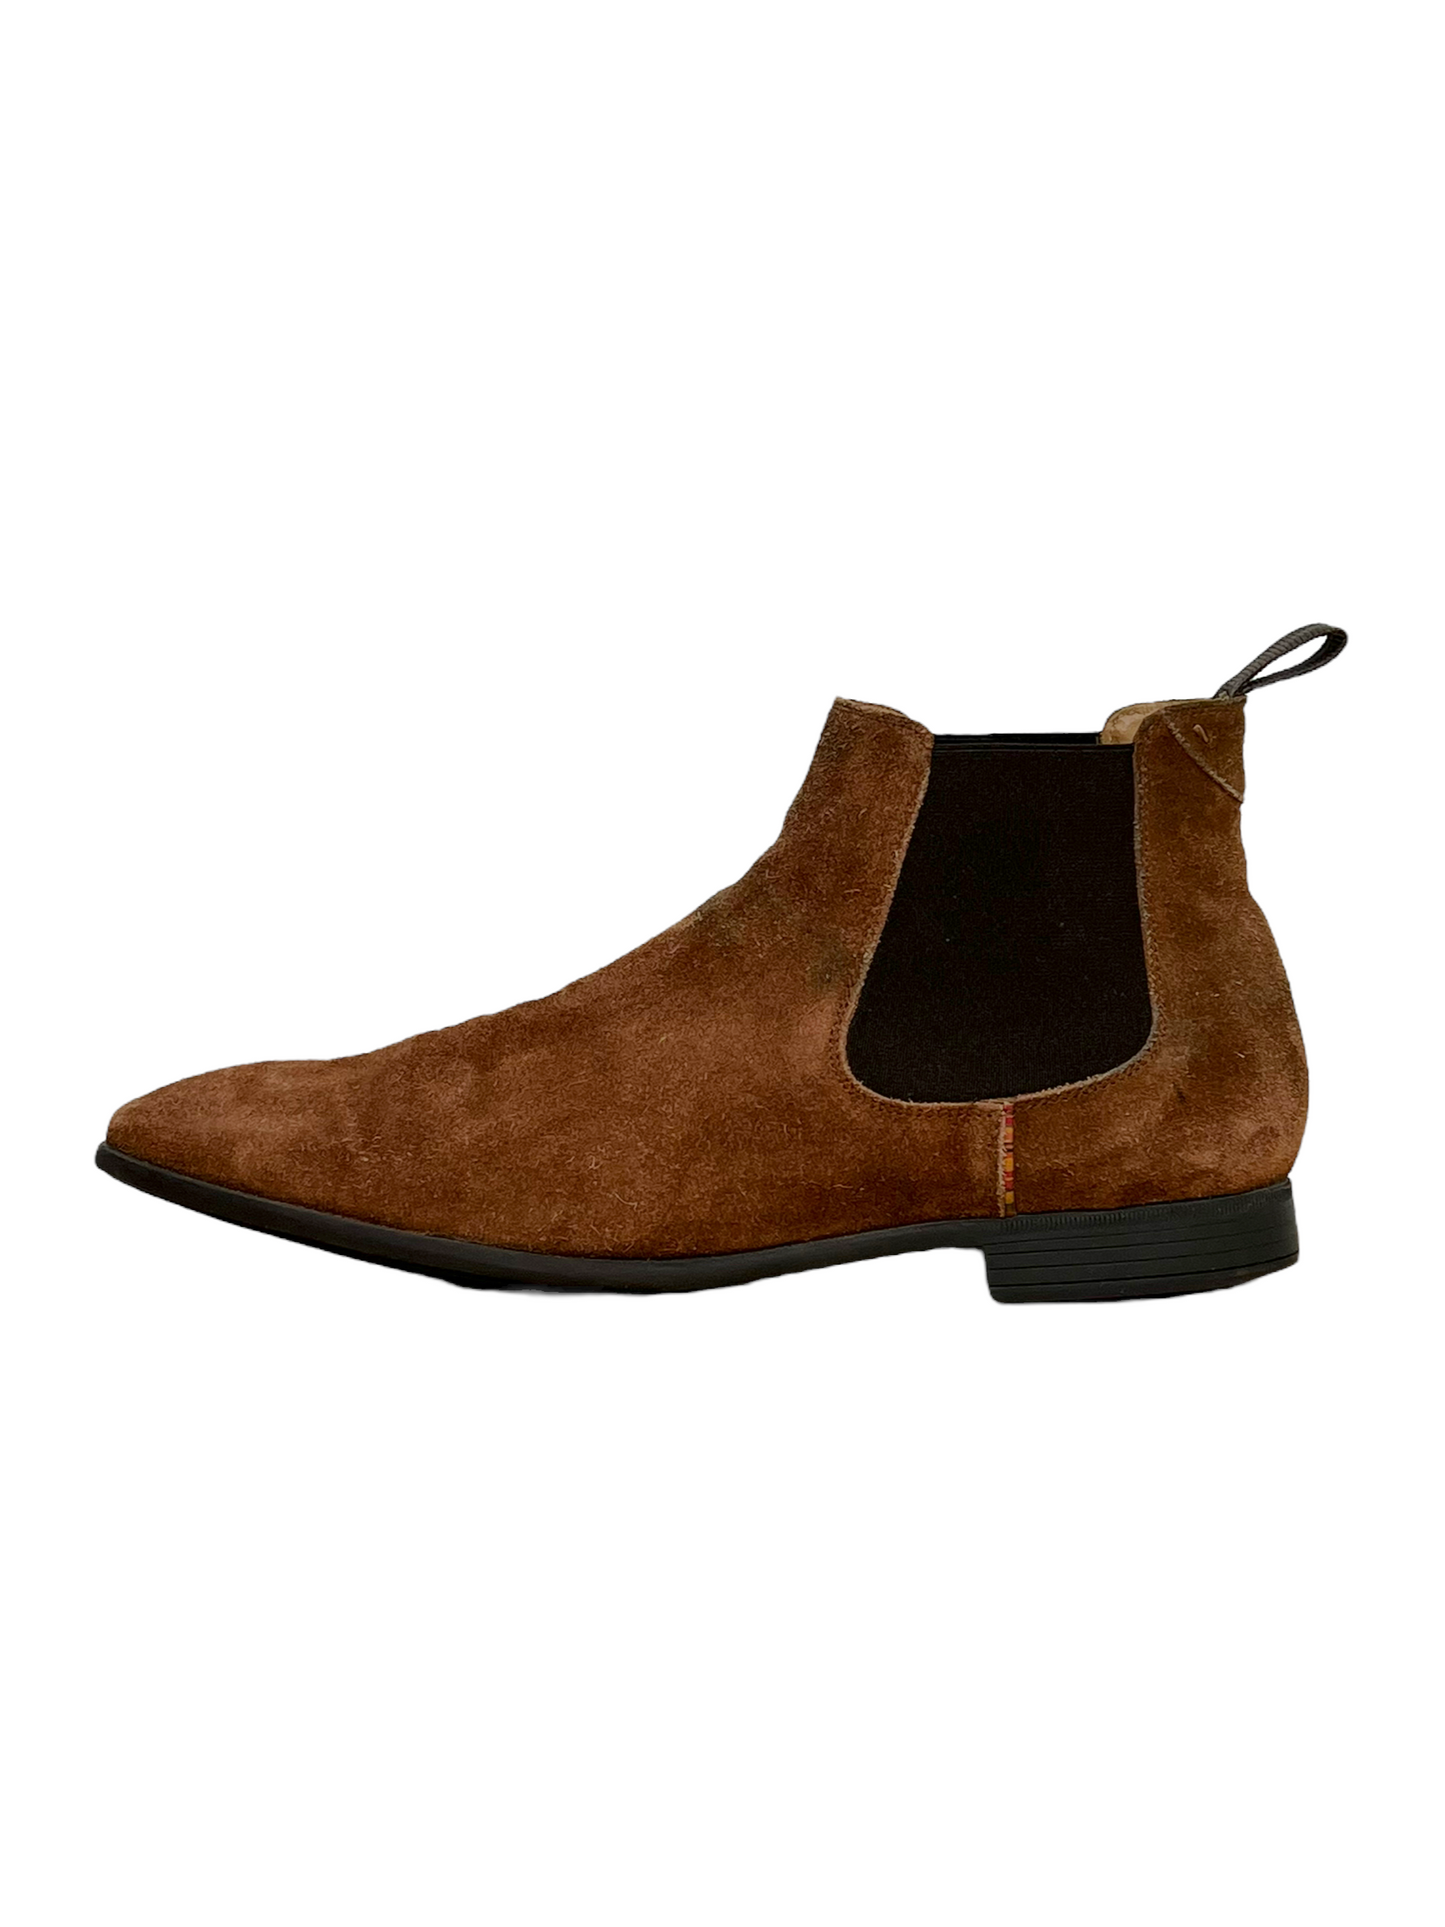 Paul Smith Chestnut Suede Falconer Ankle Chelsea Boot - Genuine Design Luxury Consignment for Men. New & Pre-Owned Clothing, Shoes, & Accessories. Calgary, Canada